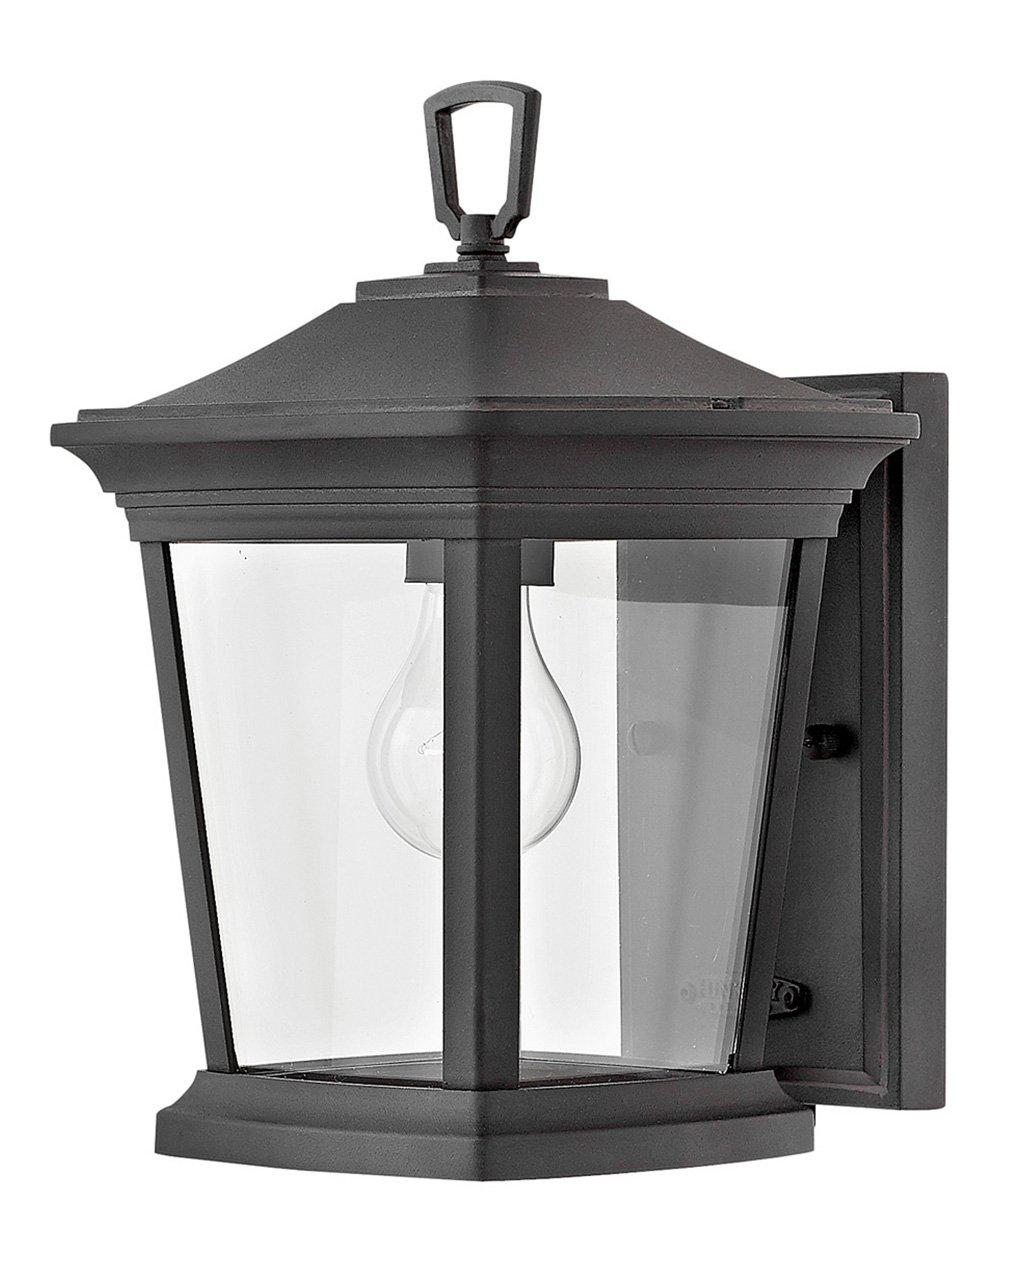 BROMLEY-Extra Small Wall Mount Lantern Outdoor l Wall Hinkley Museum Black  